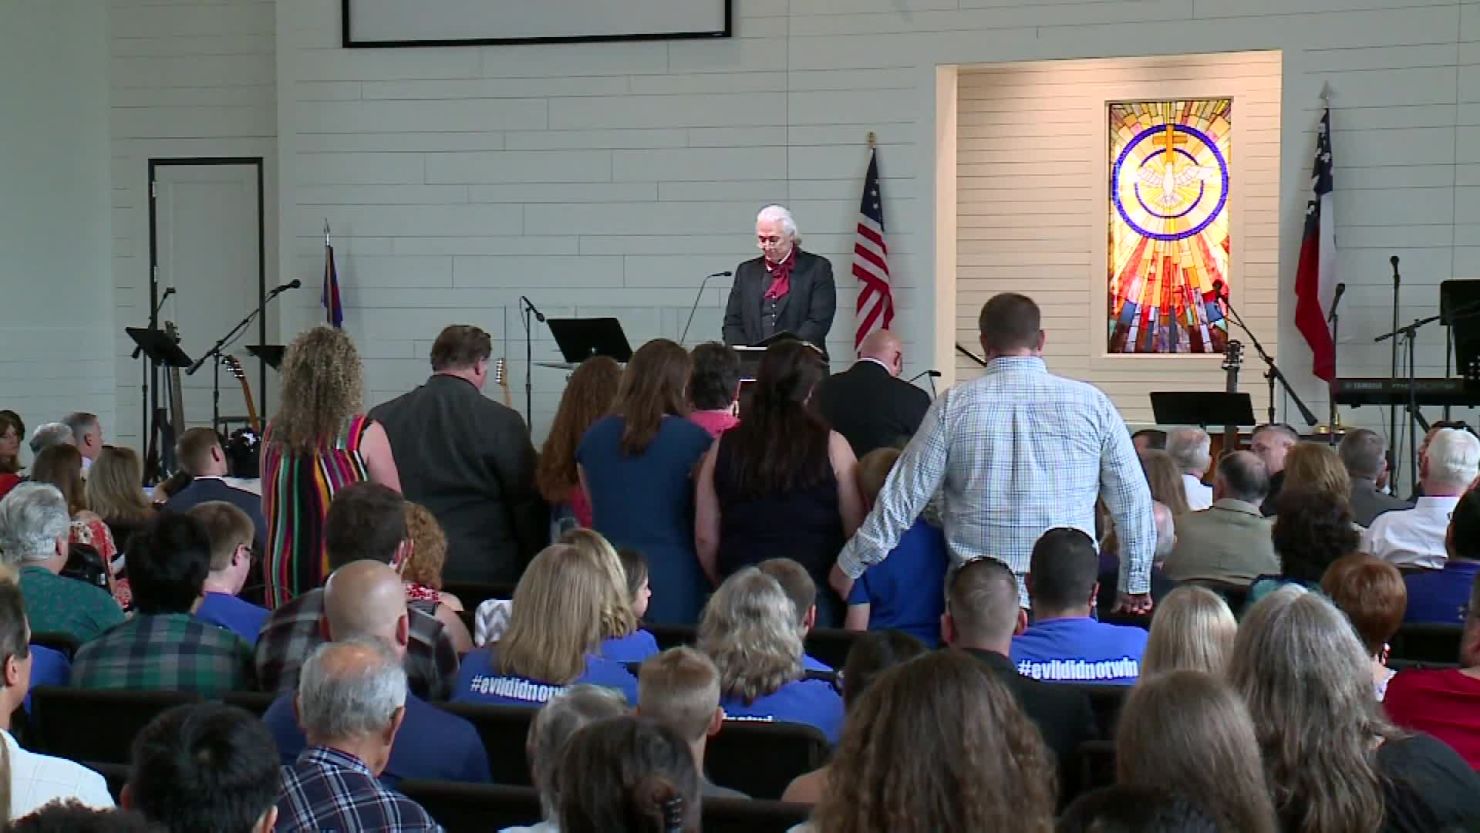 The names of the 26 victims of the Sutherland Springs shooting were read aloud Sunday during a dedication ceremony for a new sanctuary.